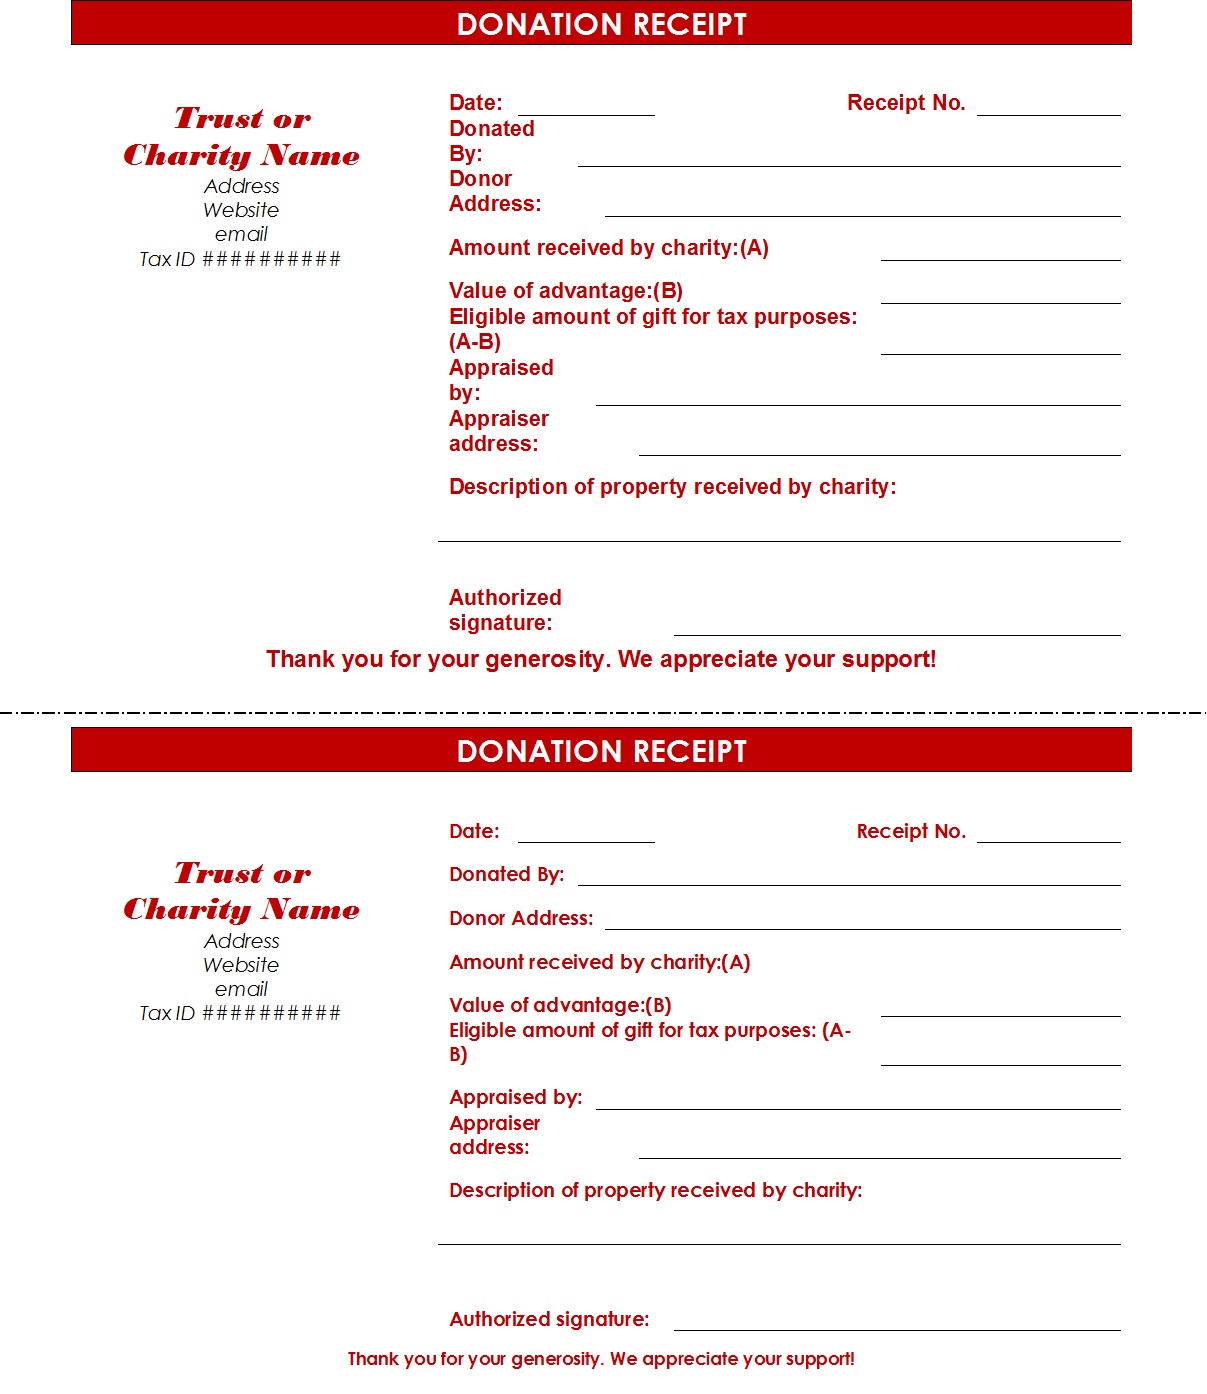 latest-donation-receipt-template-archives-free-report-templates